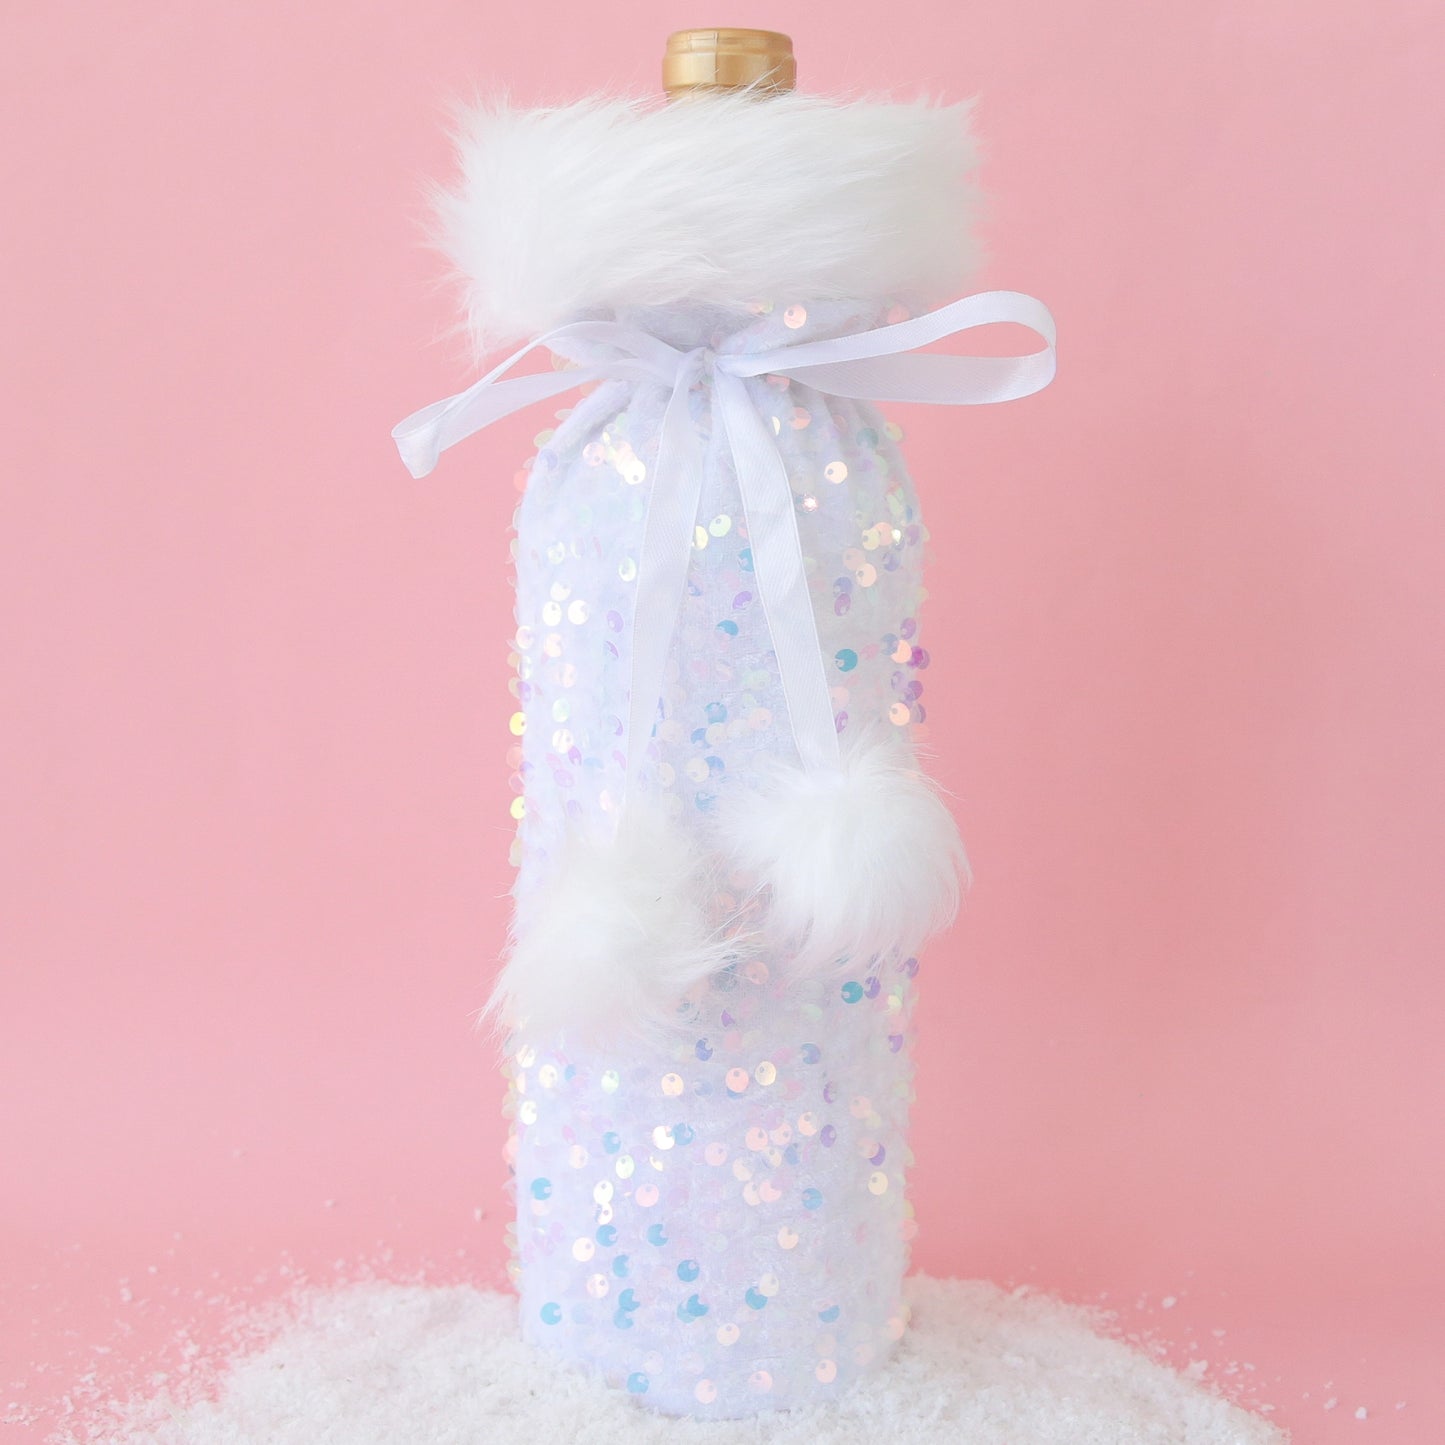 On a pink background is a iridescent and white wine bag with fluffy white faux fur lining the top and a pom pom bow to tie.